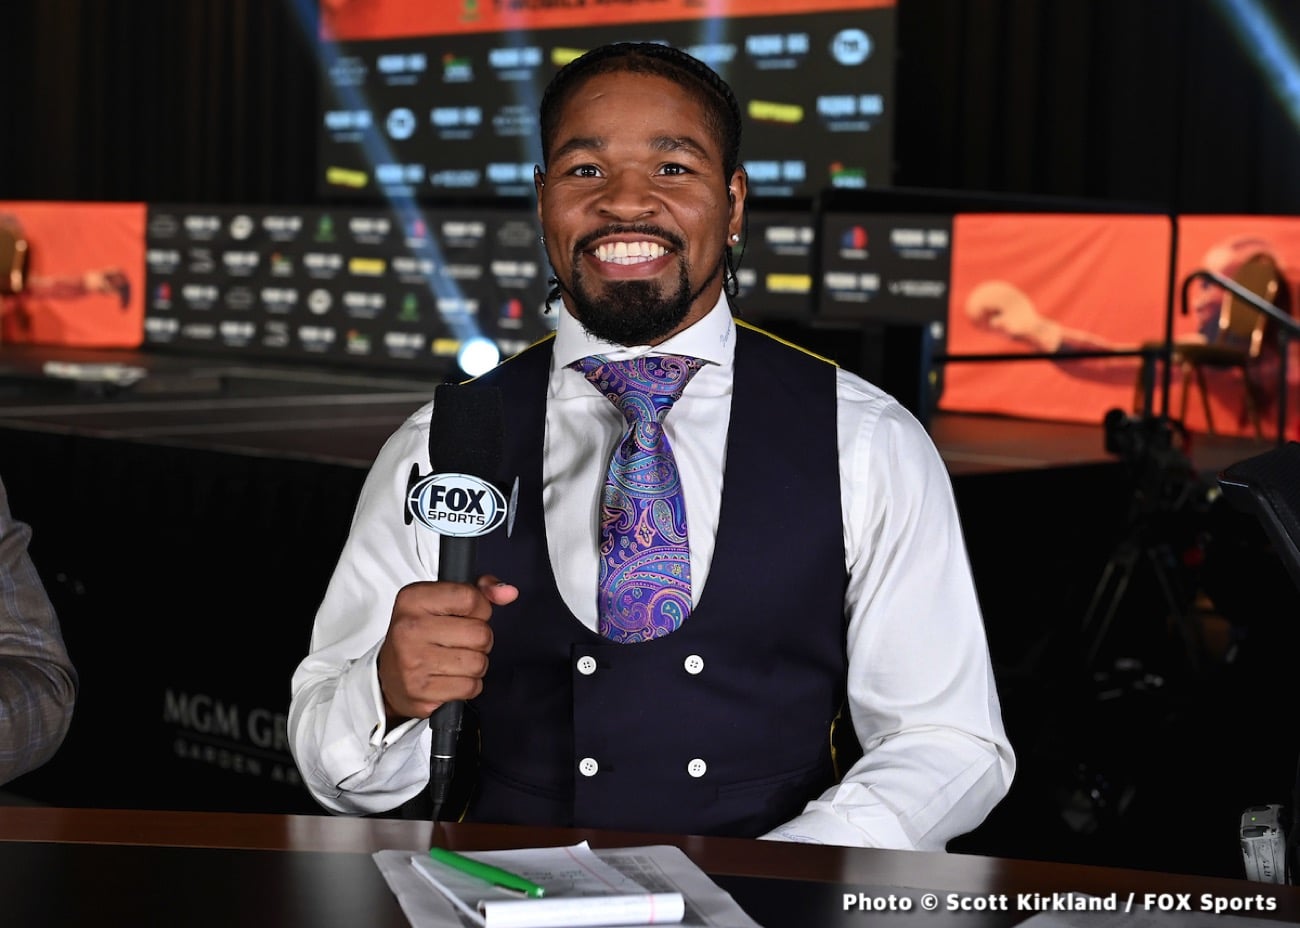 Image: Terence Crawford vs. Shawn Porter purse bid scheduled for Sept.2nd